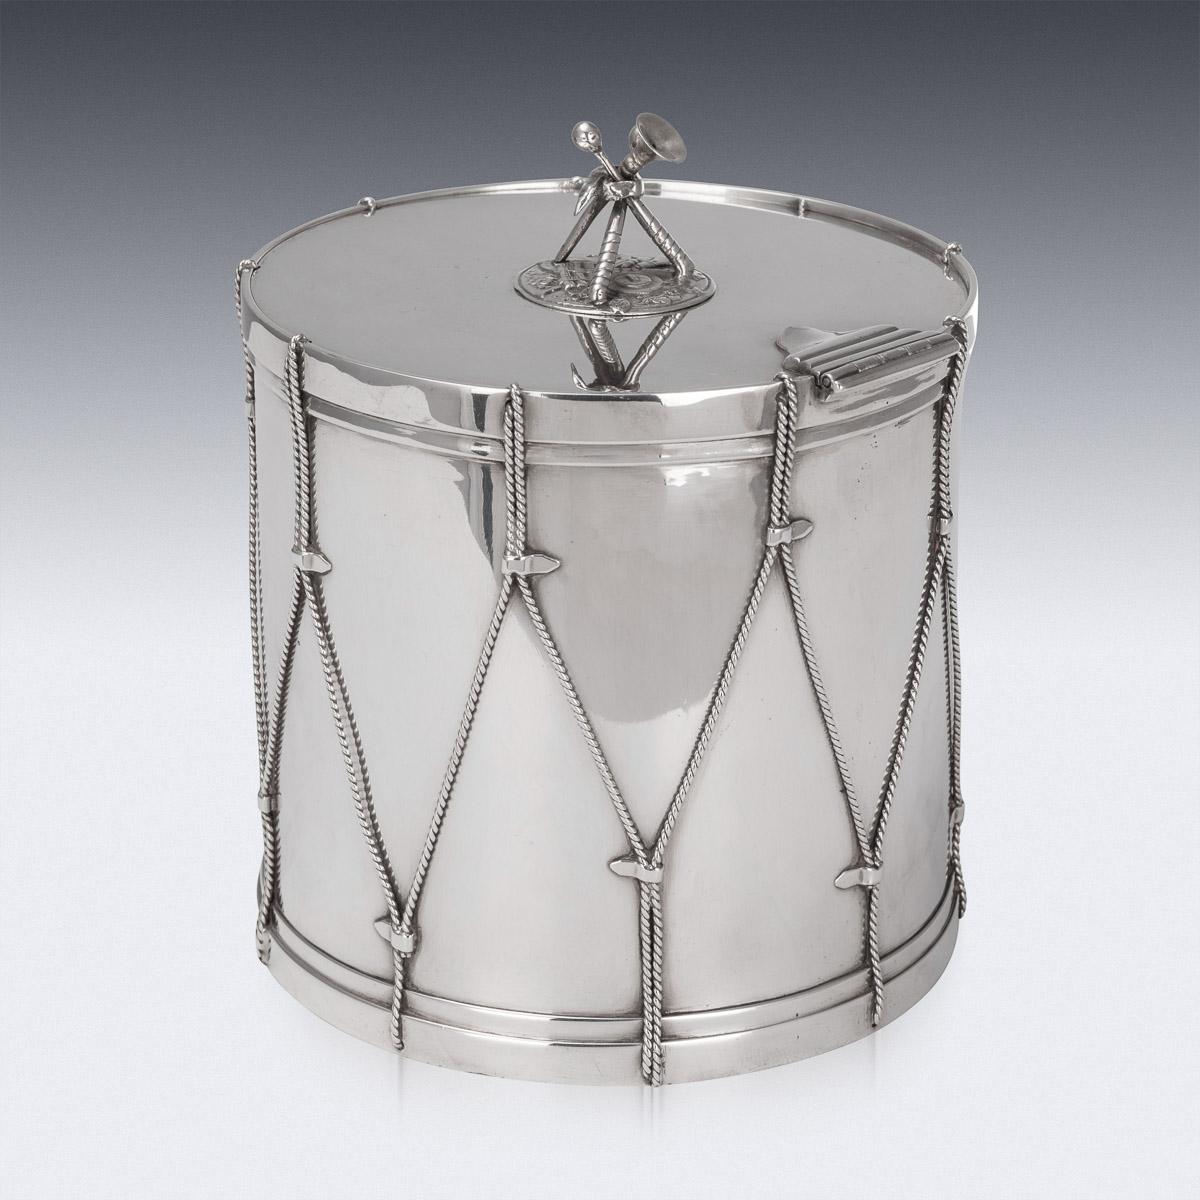 Antique 19th century Victorian silver plated large ice bucket, in a form of a regimental drum, intricately made and applied with twist ropes and held with straps, the hinged lid mounted with a cast finial depicting drumsticks and a cavalry trumpet.